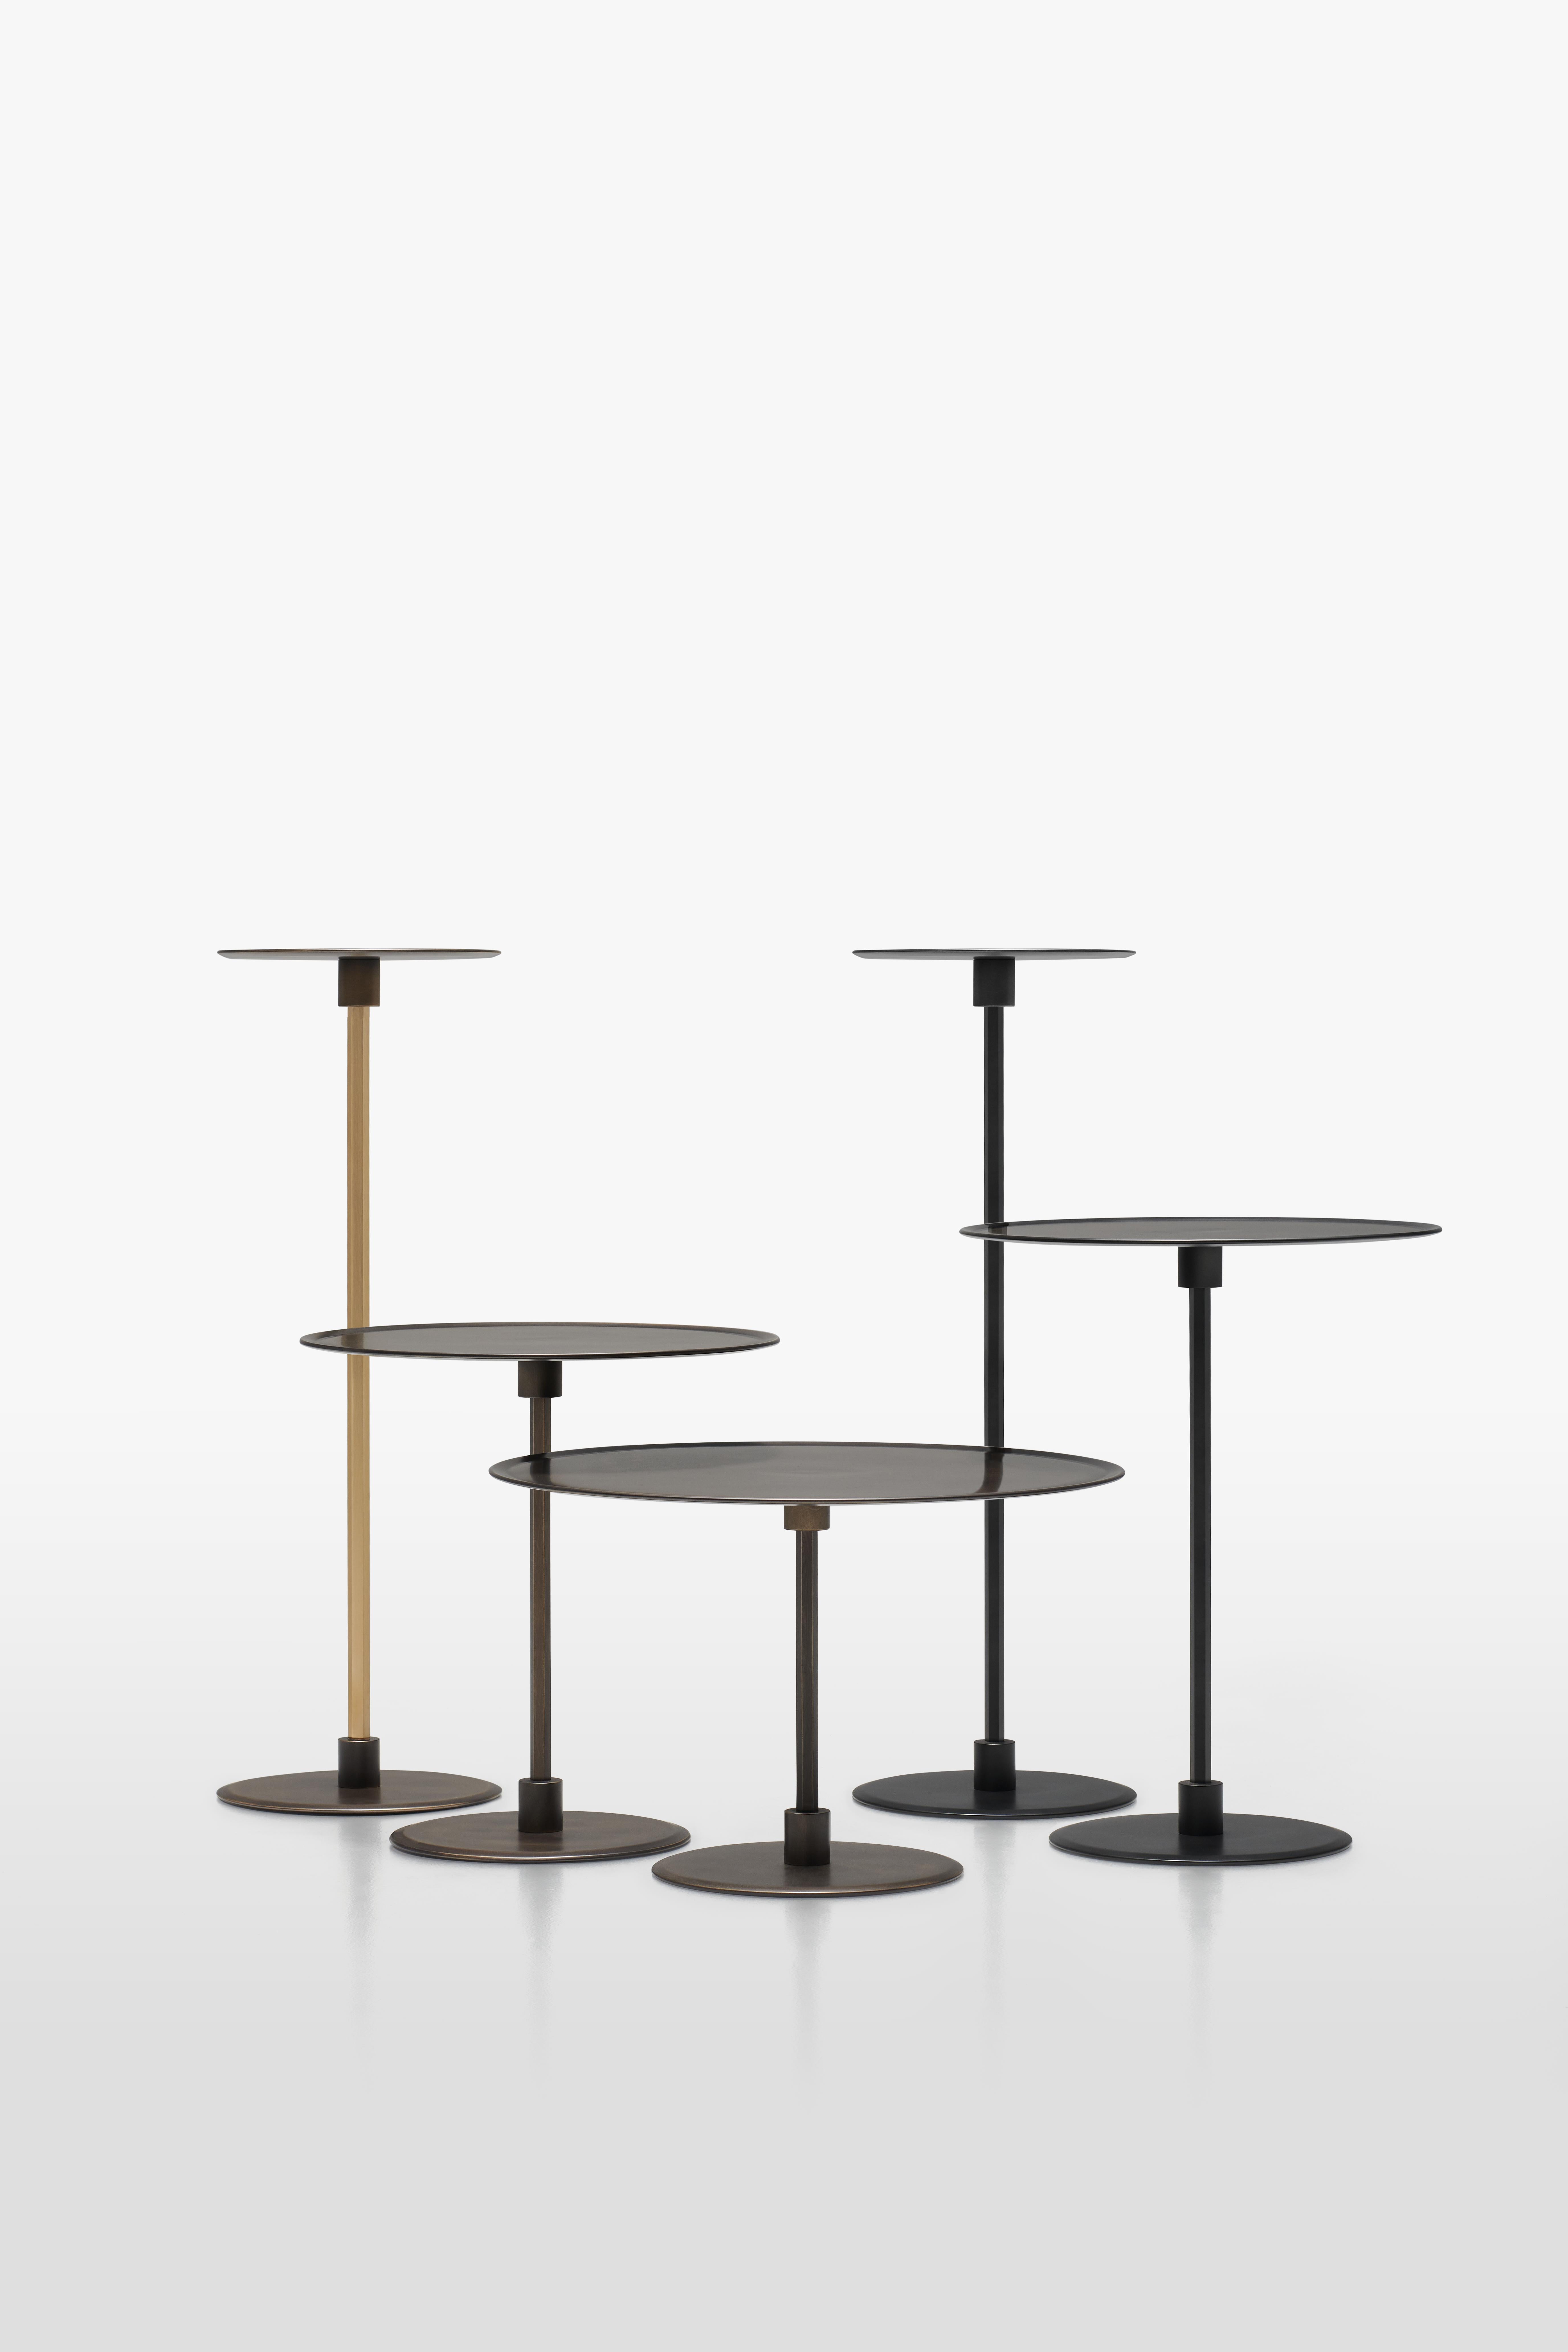 Architect Gianfranco Frattini signed Gong, which was unveiled for the first time in 1987.
Gong is a range of round metal tables of formal simplicity and clean lines, which are available in various sizes and heights, and can be used individually or